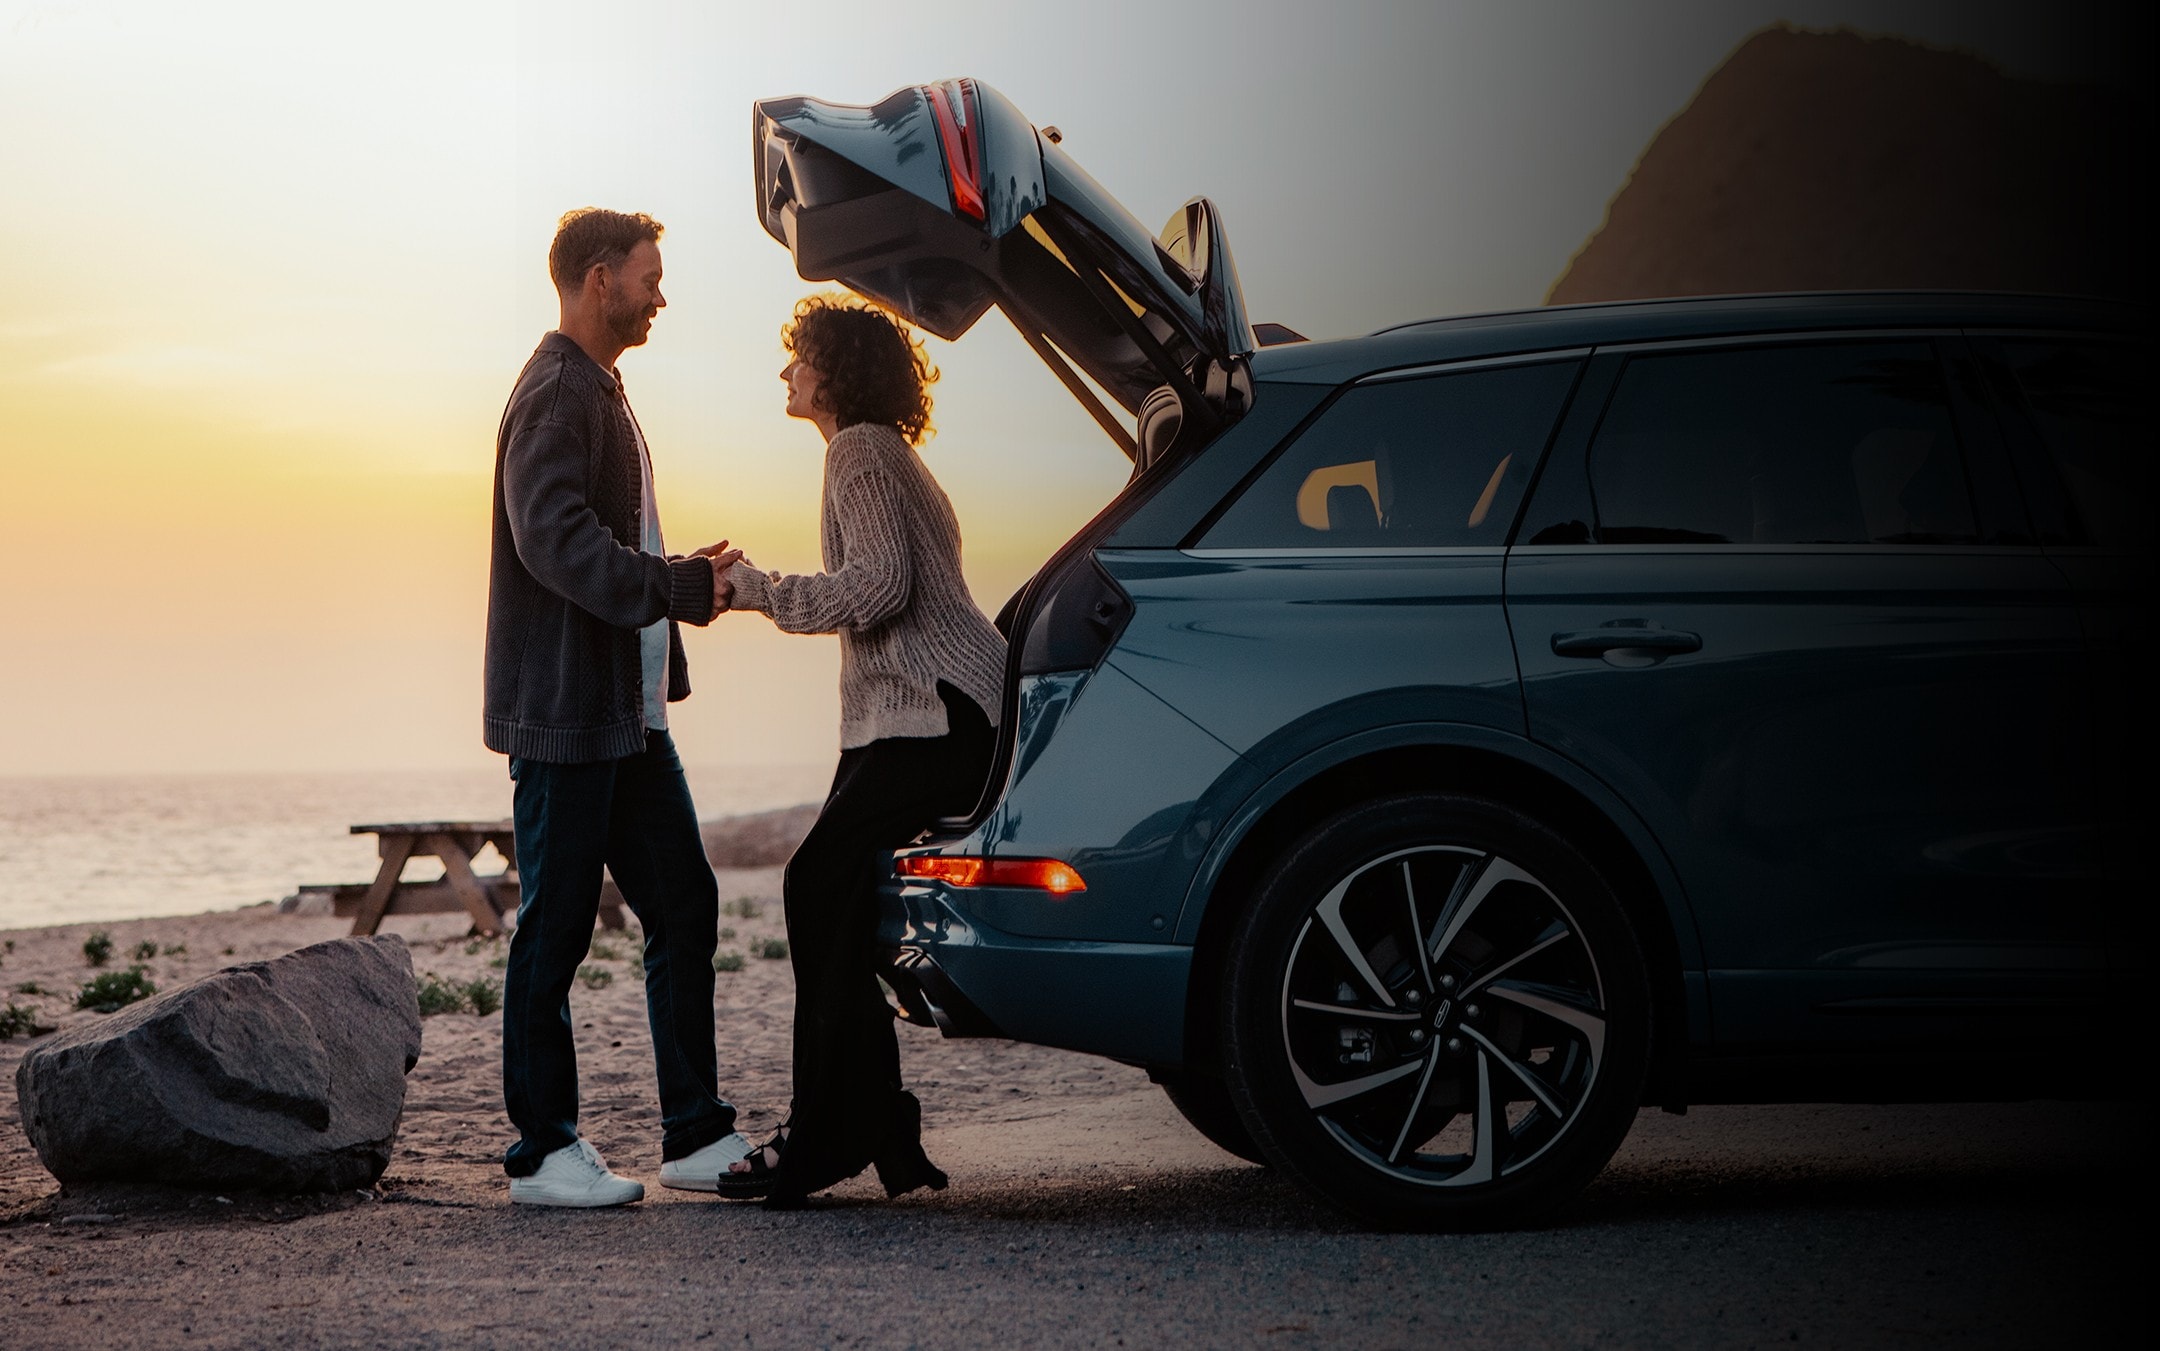 A person with hands full is engaged with the hands-free power liftgate